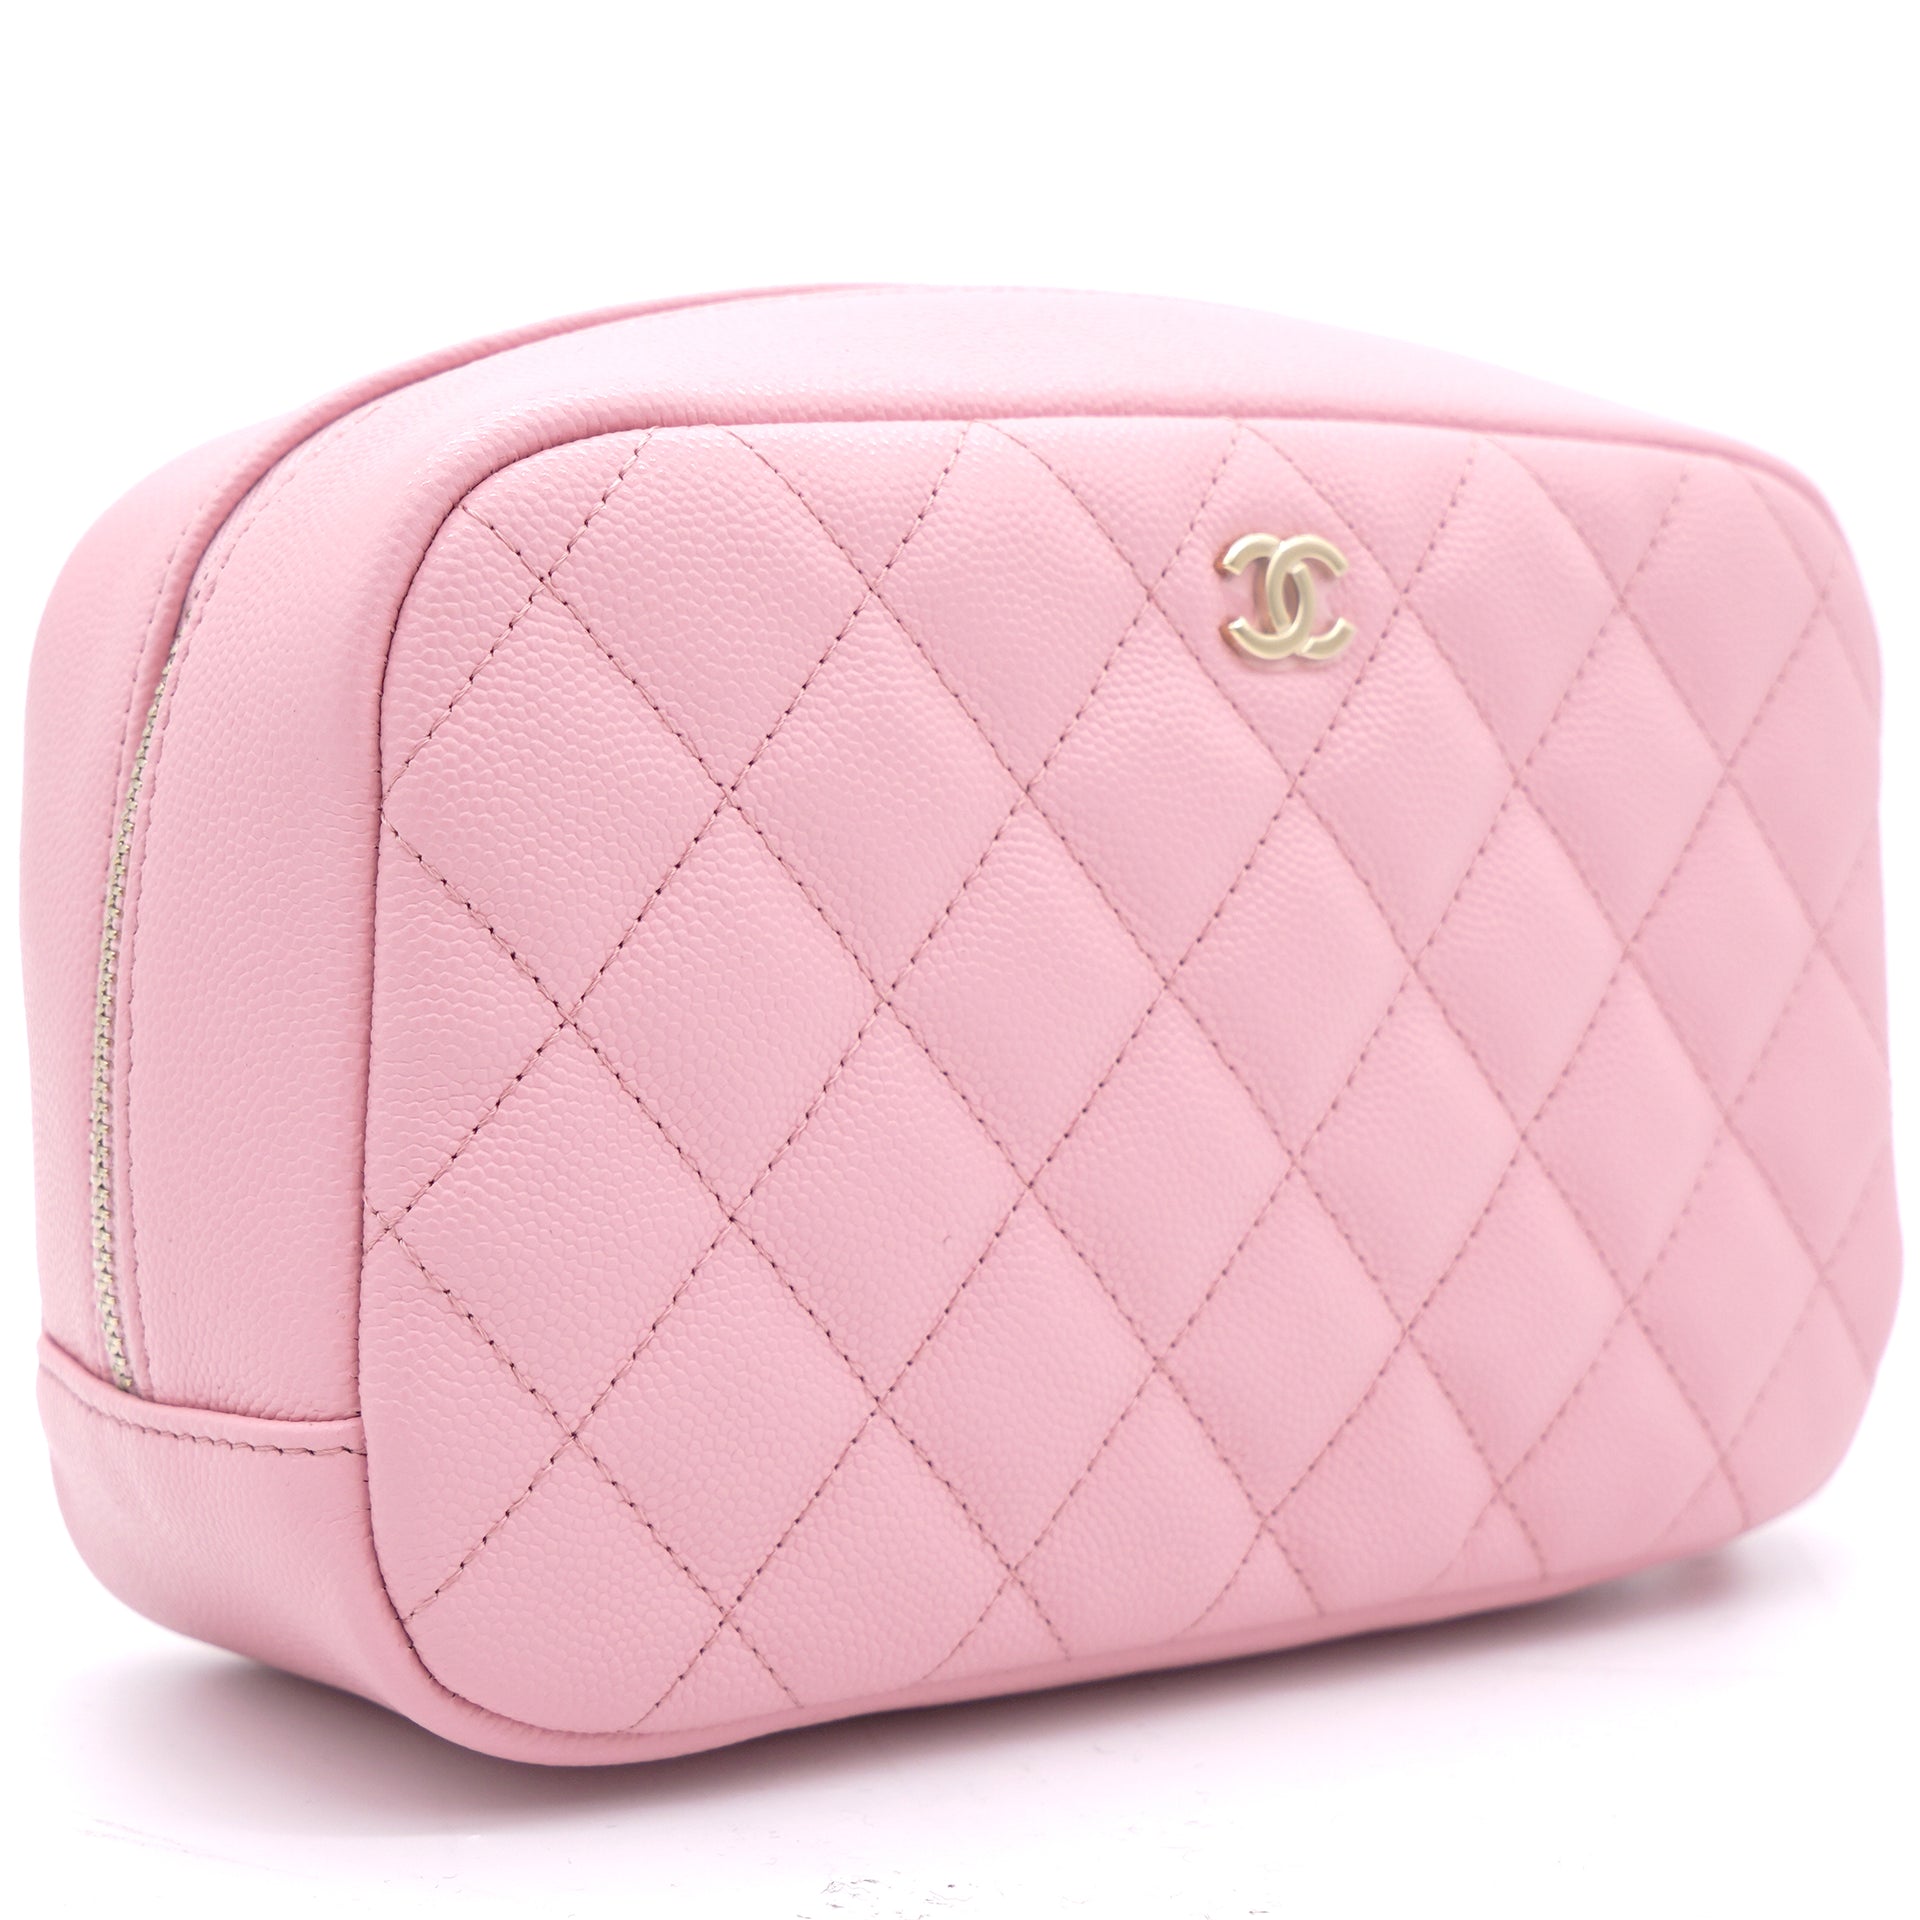 CHANEL MakeUp Bag CHANEL  Model Cosmetic Pouch  DeinDeal